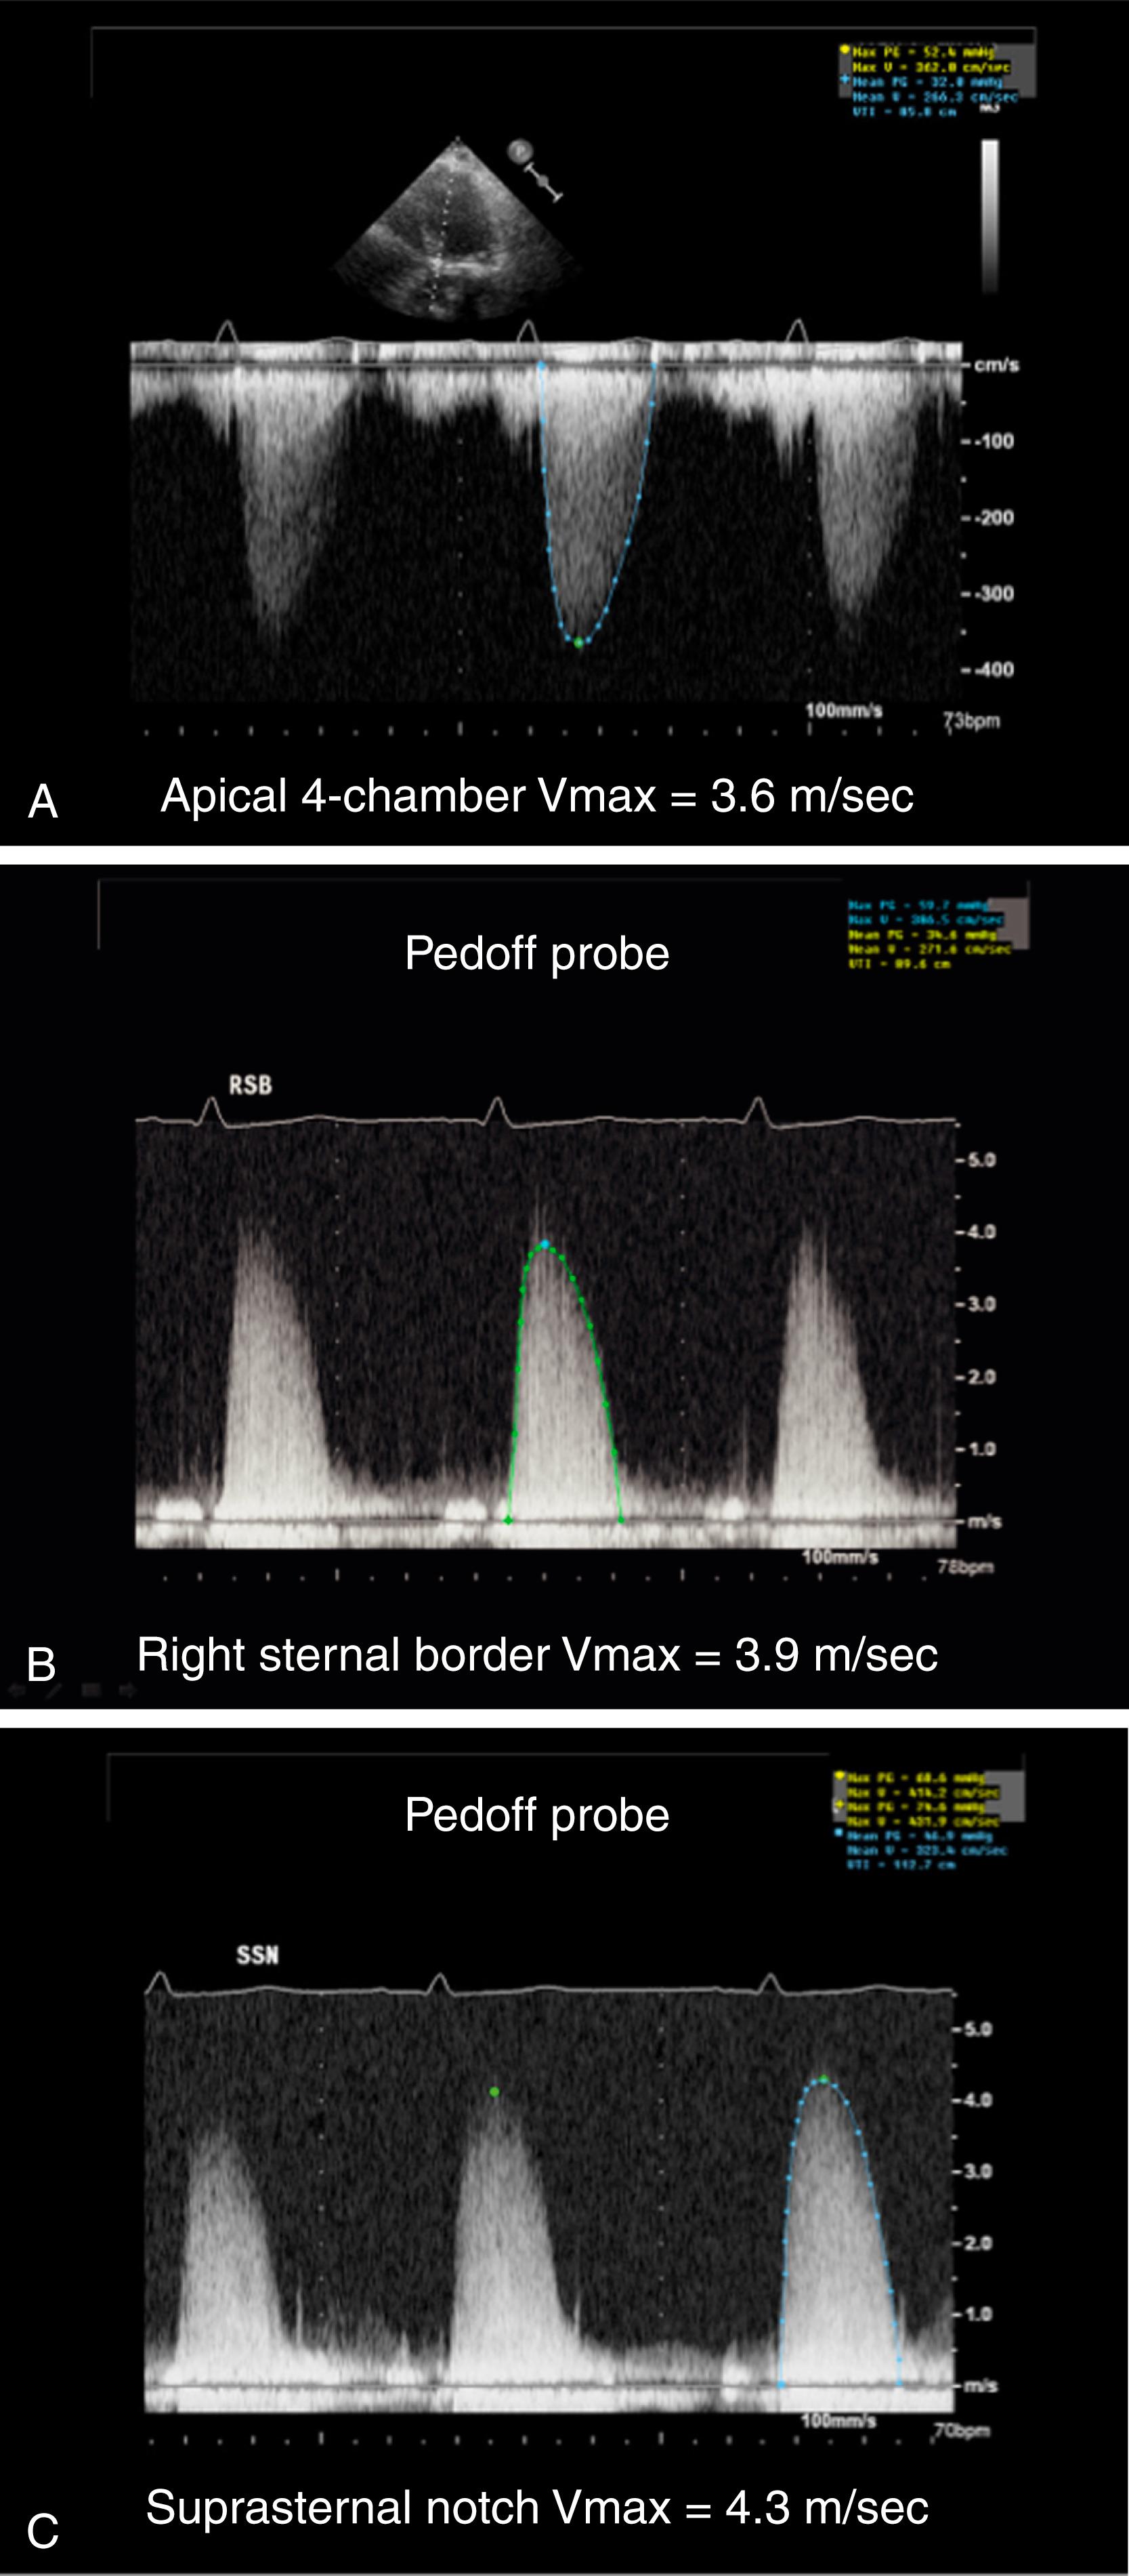 Figure 79.5, Continuous-wave Doppler tracings from a patient with severe aortic stenosis illustrate the importance of using multiple transducer positions to obtain the highest (maximal) transaortic velocity. A, Apical four-chamber view using imaging probe detects a velocity of 3.6 m/s. B, A slightly higher velocity (3.9 m/s) is obtained from the right sternal border using a nonimaging (Pedoff) probe. C, The highest velocity (4.3 m/s) was obtained from the suprasternal notch using a non-imaging probe.